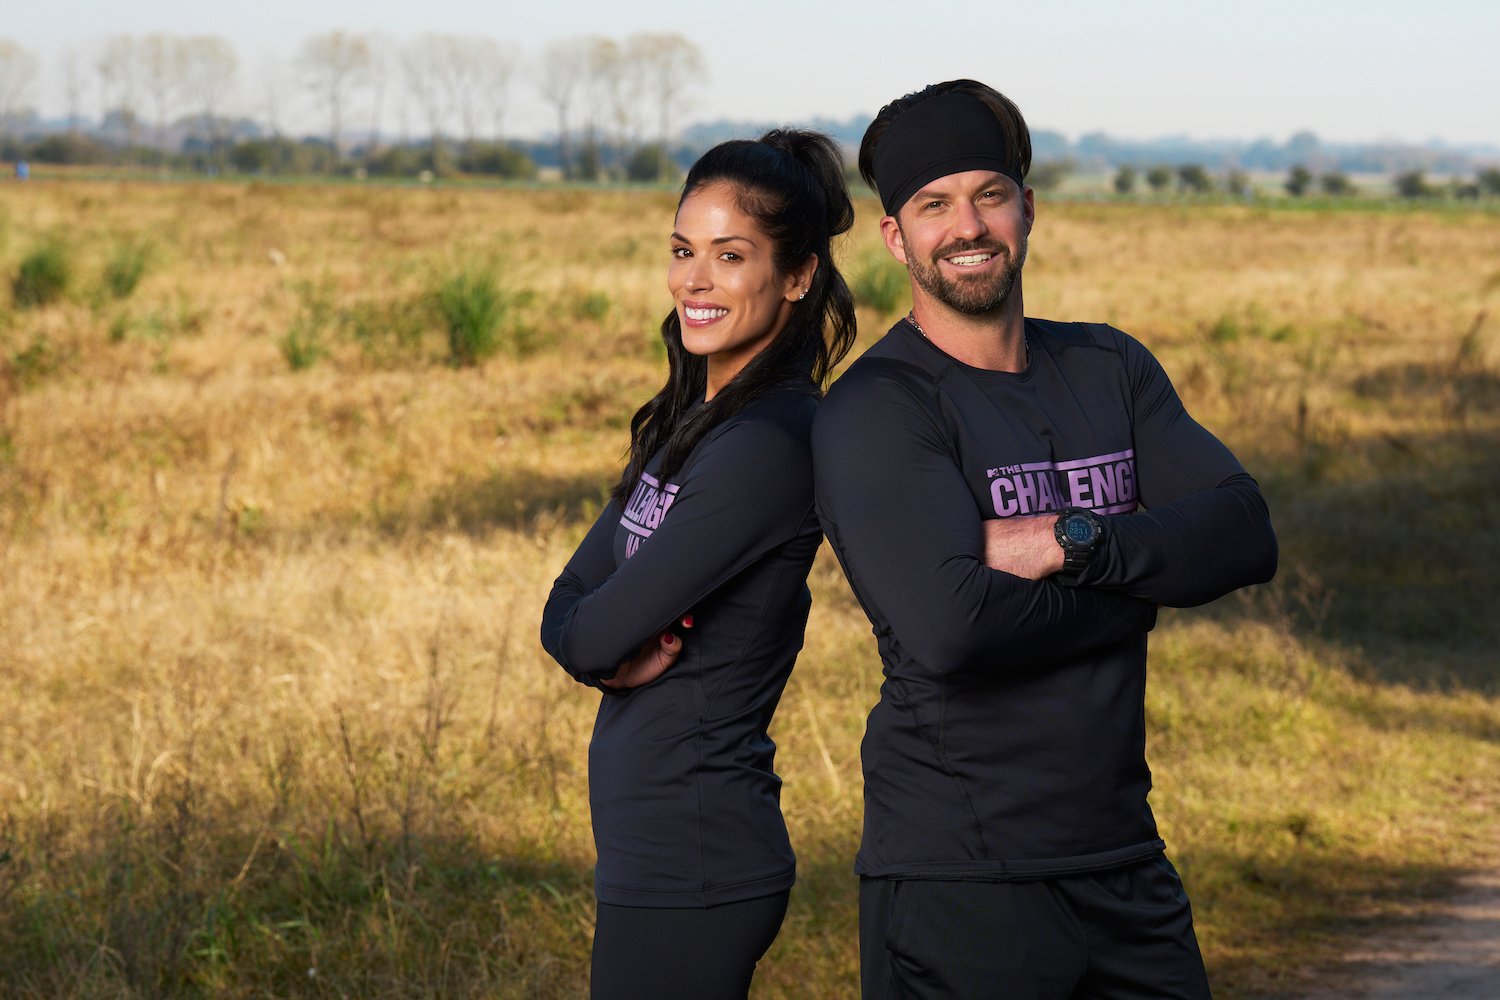 Johnny 'Bananas' Devenanzio and Nany González standing back to back in 'The Challenge' Season 38